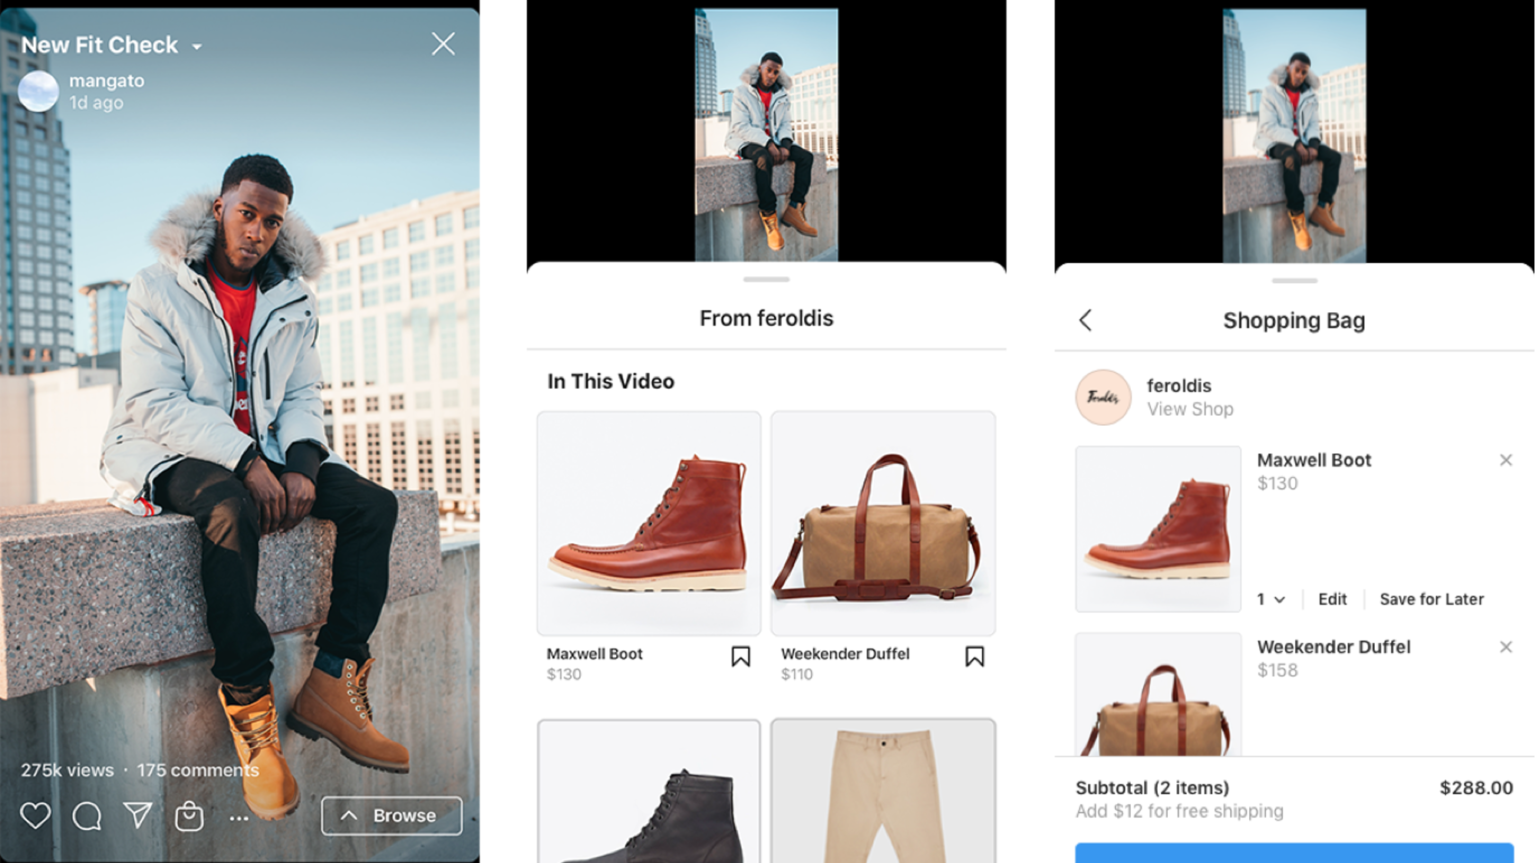 Instagram check out improves product discoverability and conversion. 